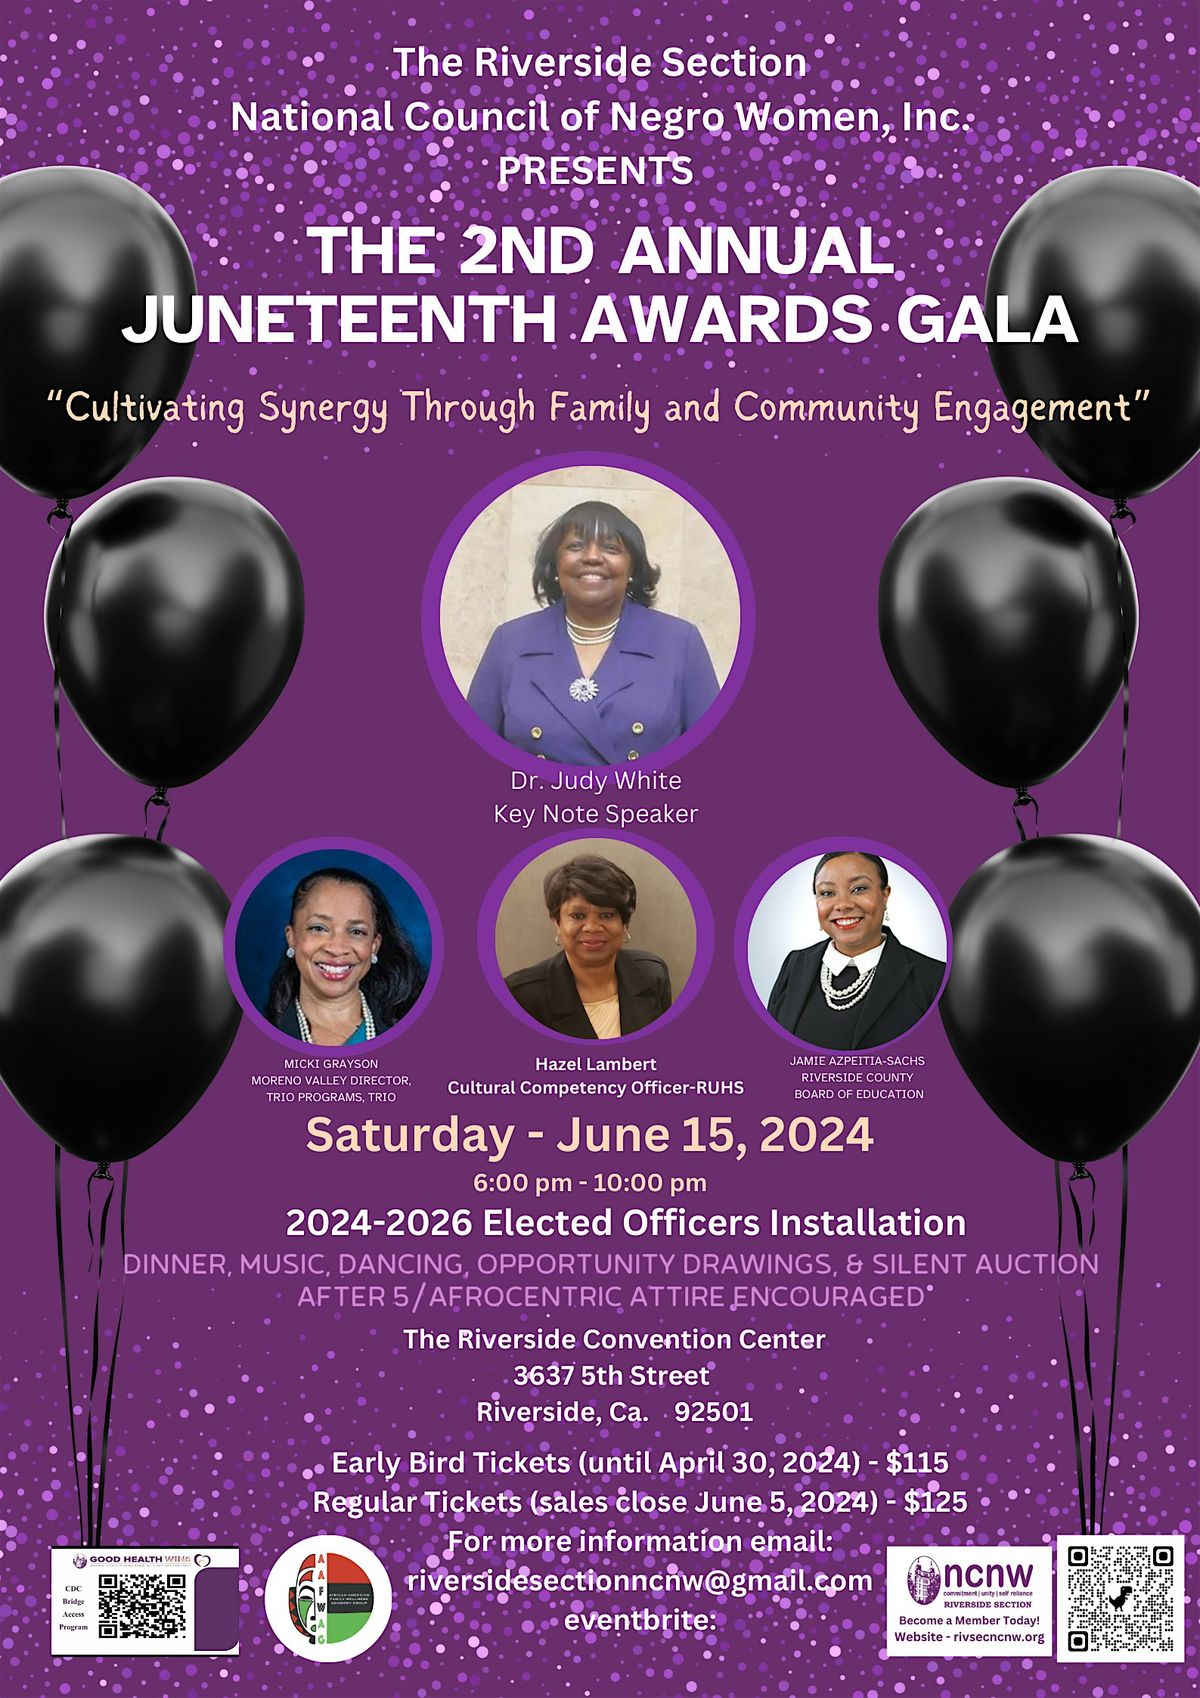 Riverside Section NCNW presents The Second Annual Juneteenth Awards Gala